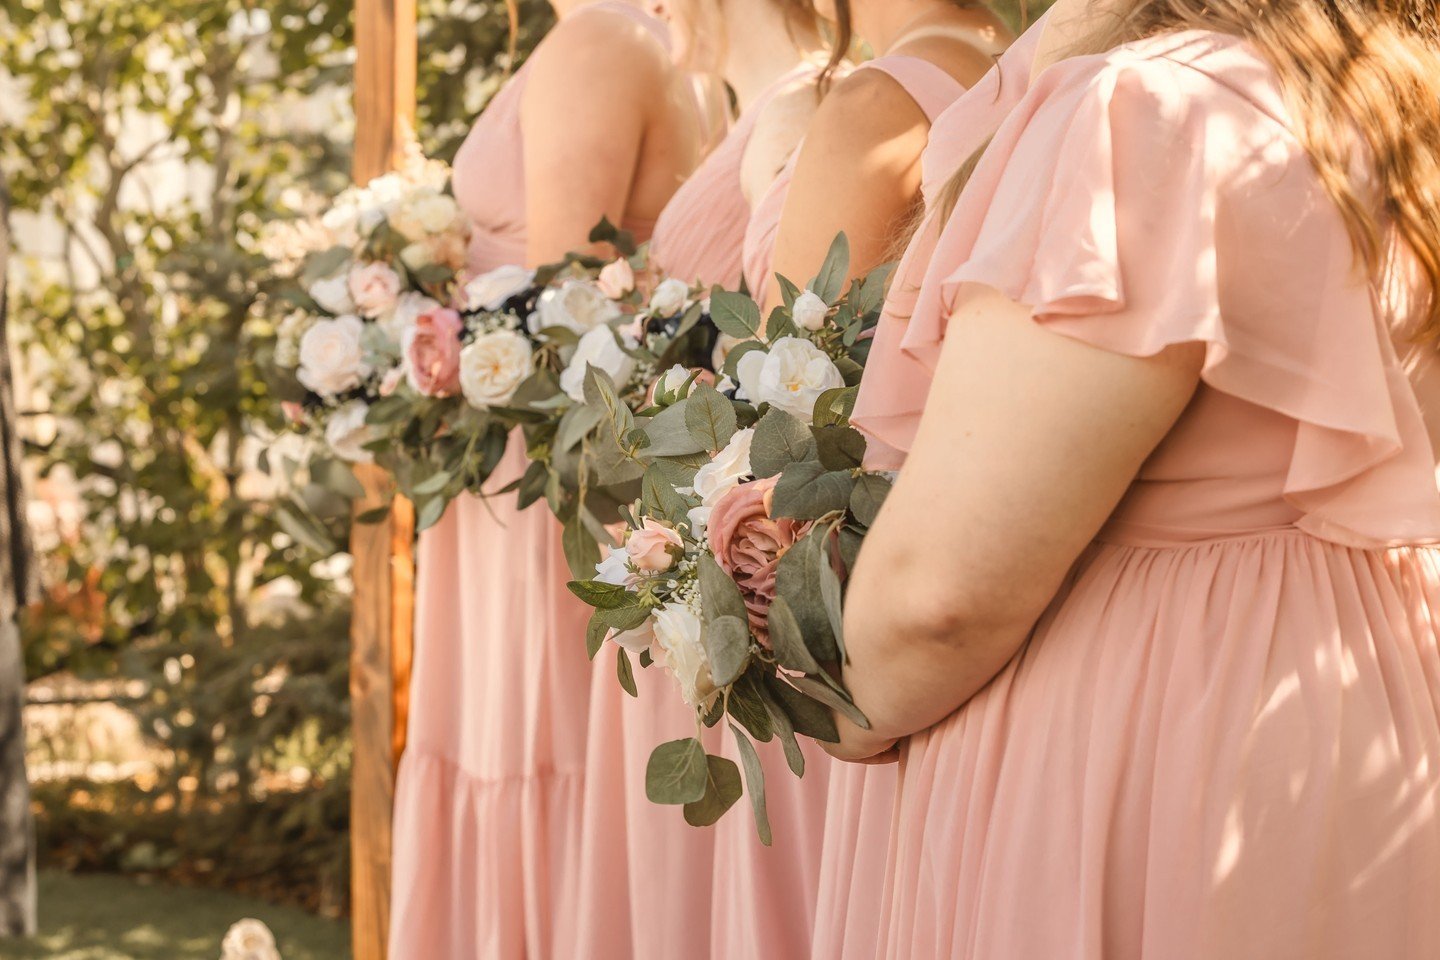 Behind every bride, there&rsquo;s a squad of amazing bridesmaids ready to make memories, share laughs, and support her every step of the way ✨
&bull;
&bull;
&bull;
&bull;
&bull;
#bridesmaidstyle #bridesmaids #bridesmaiddresses #bridesmaidbouquets #fl